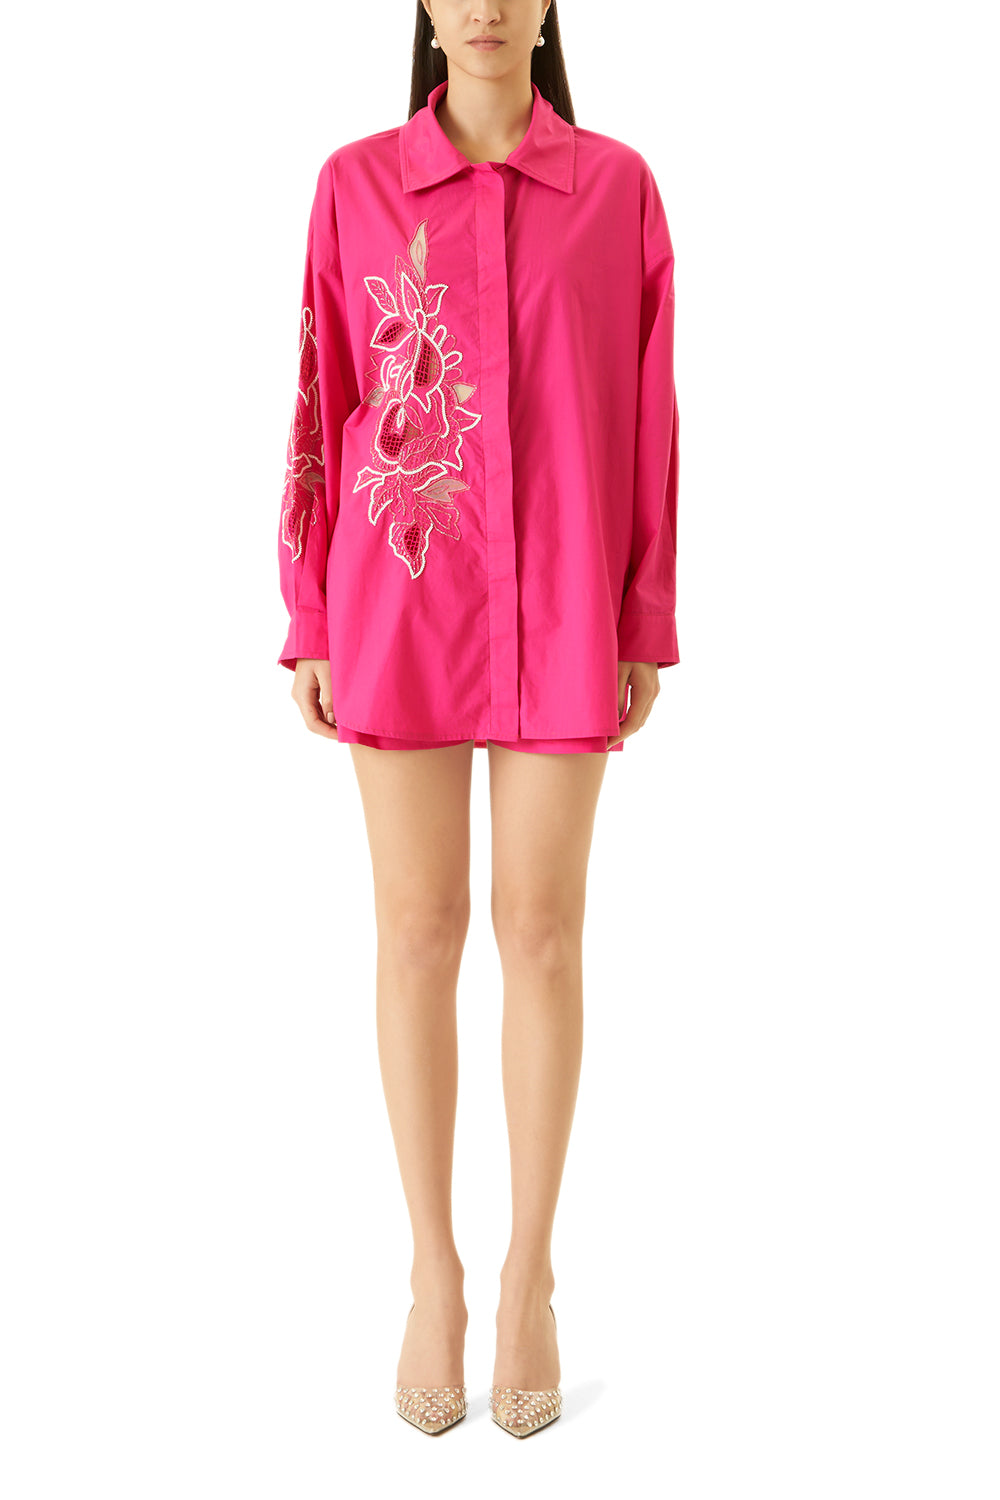 Pink Cutwork Shirt With Shorts Co-ord Set